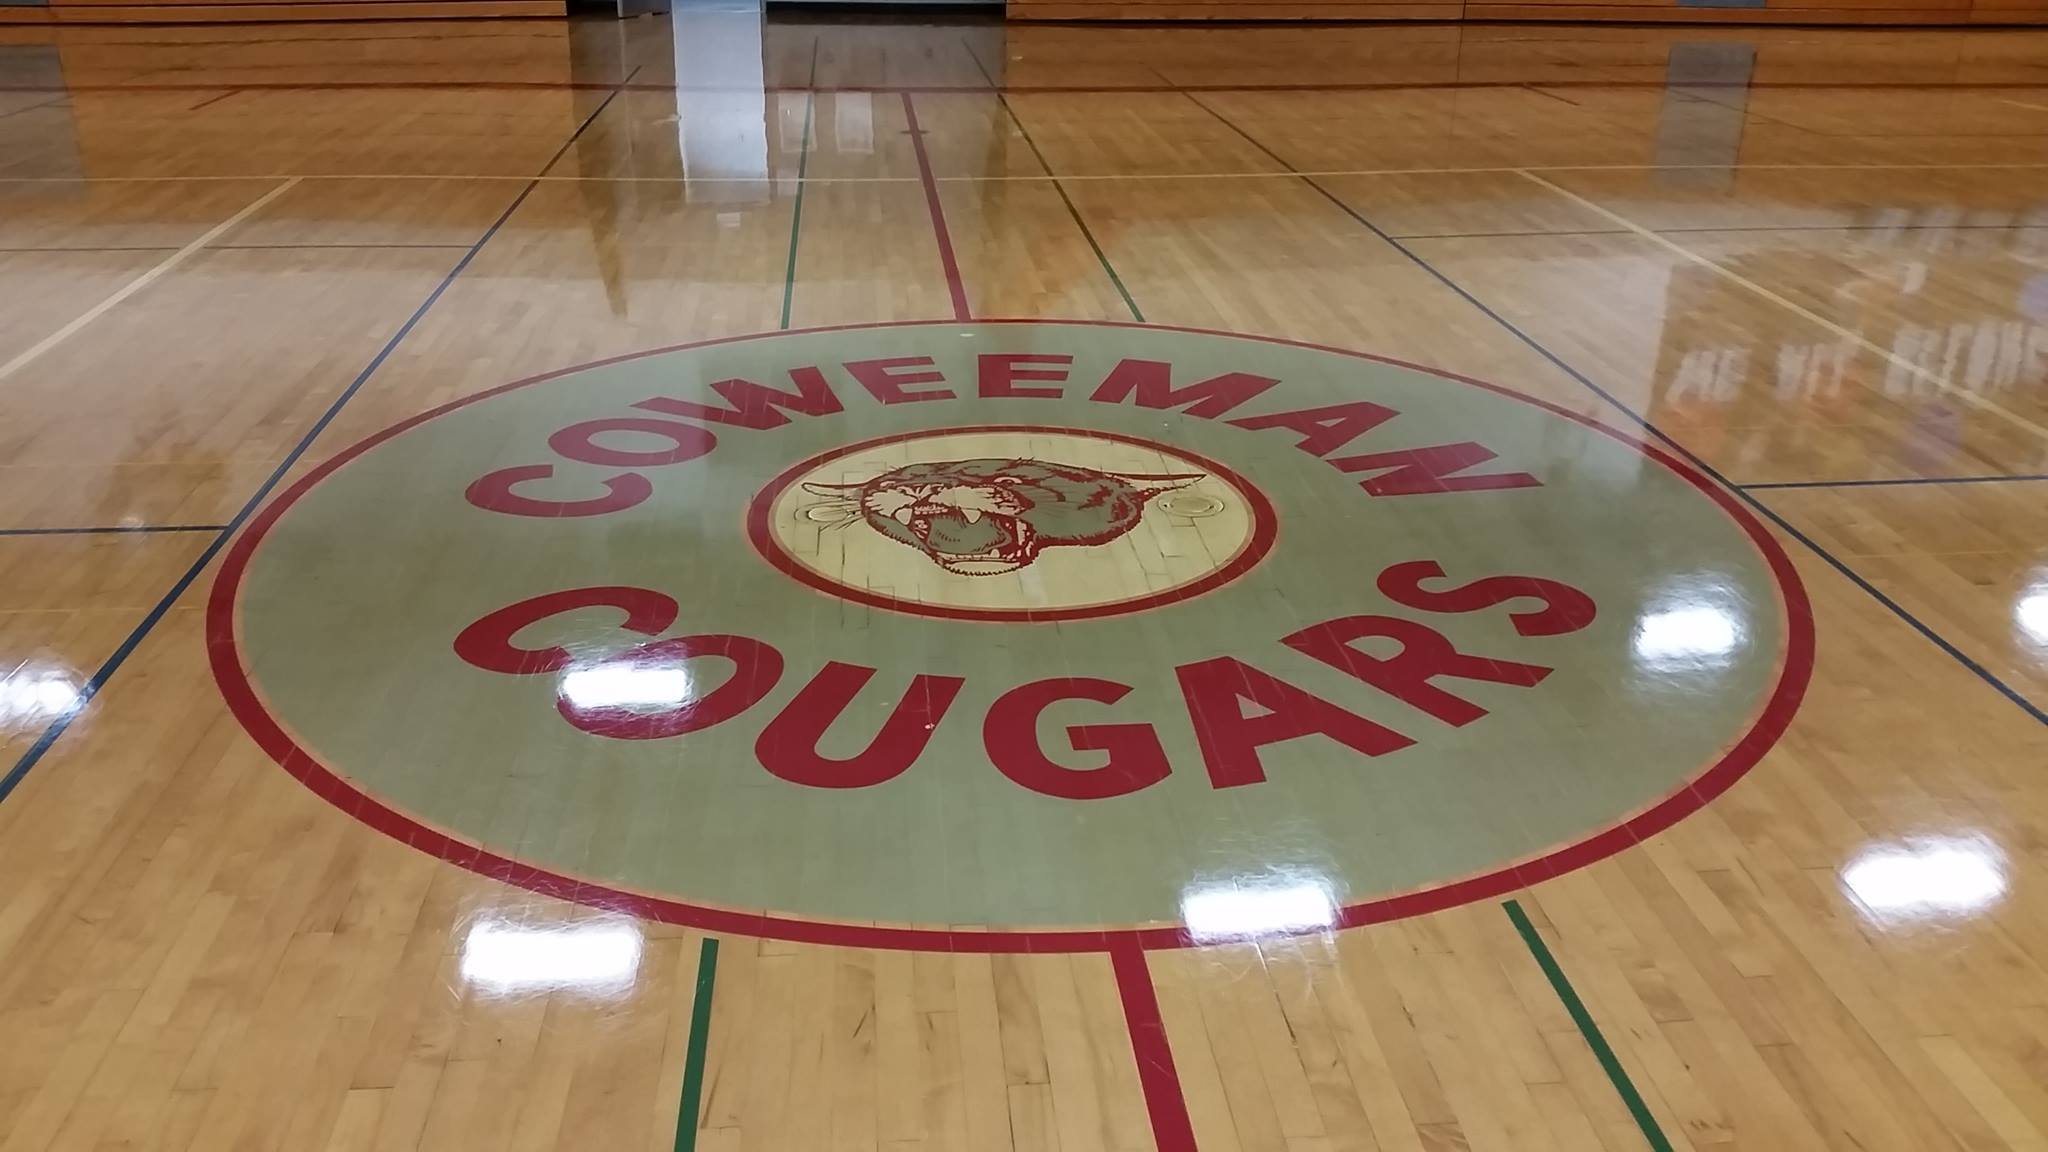 logo from the gym floor